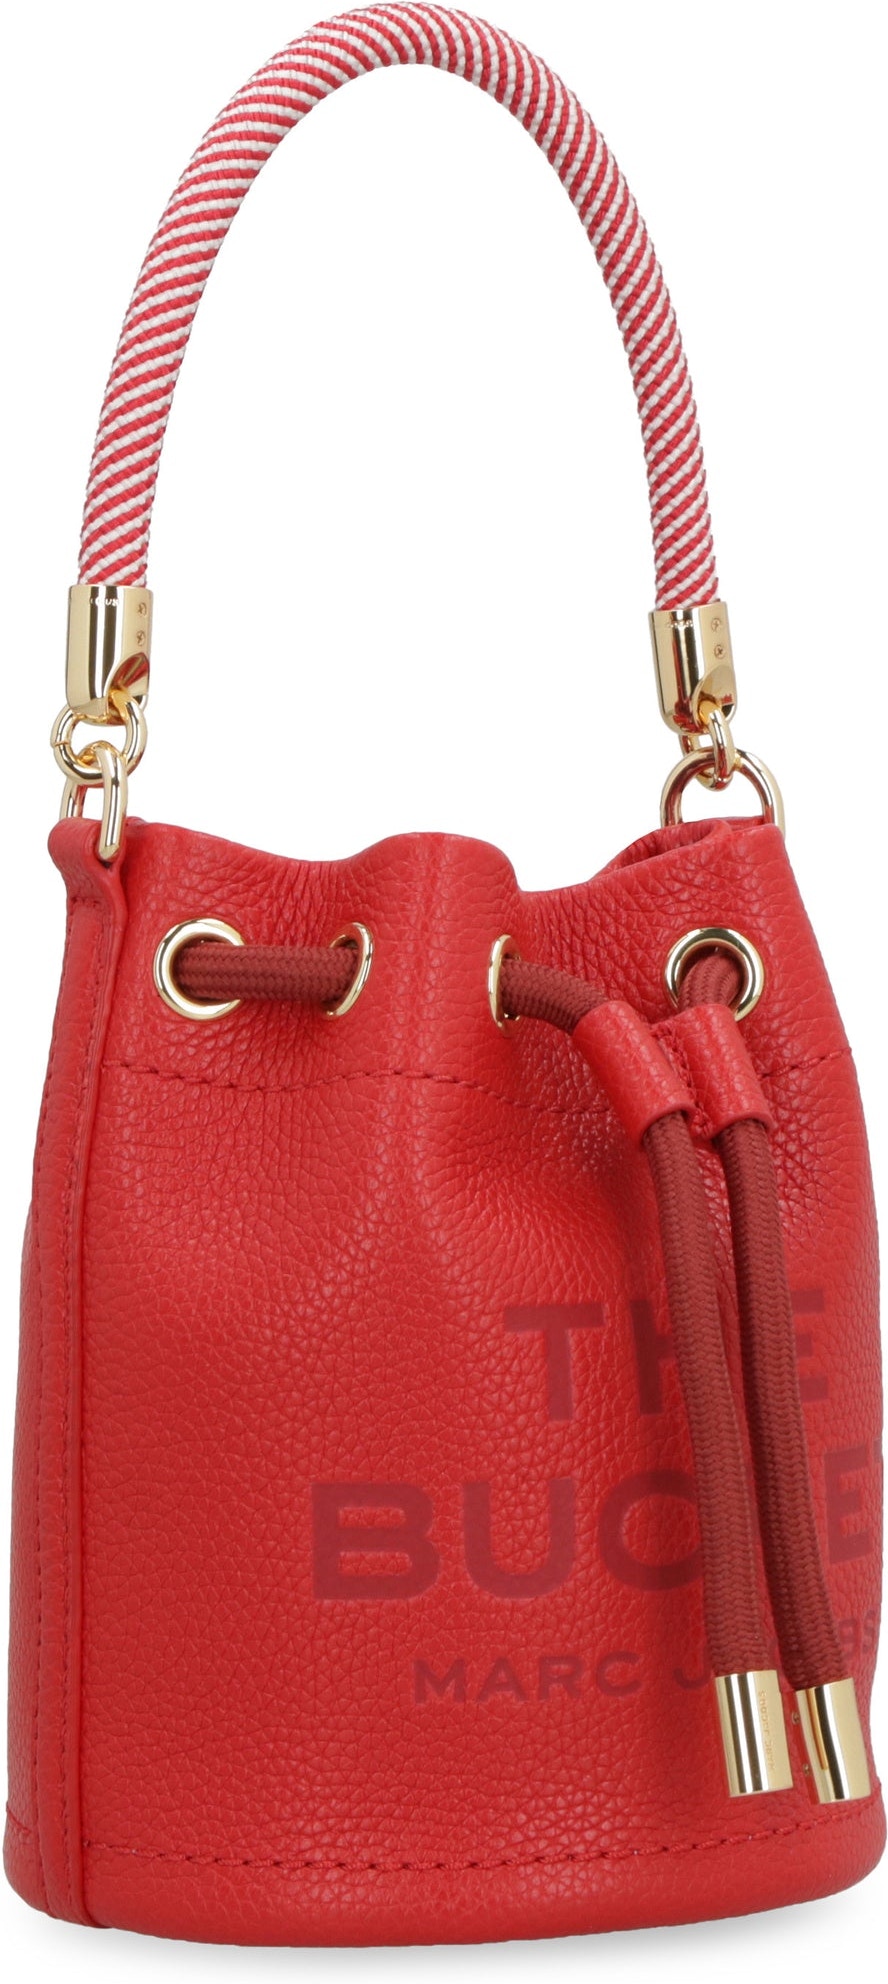 RED MARC JACOBS MARC JACOBS 'THE LEATHER MINI BUCKET BAG